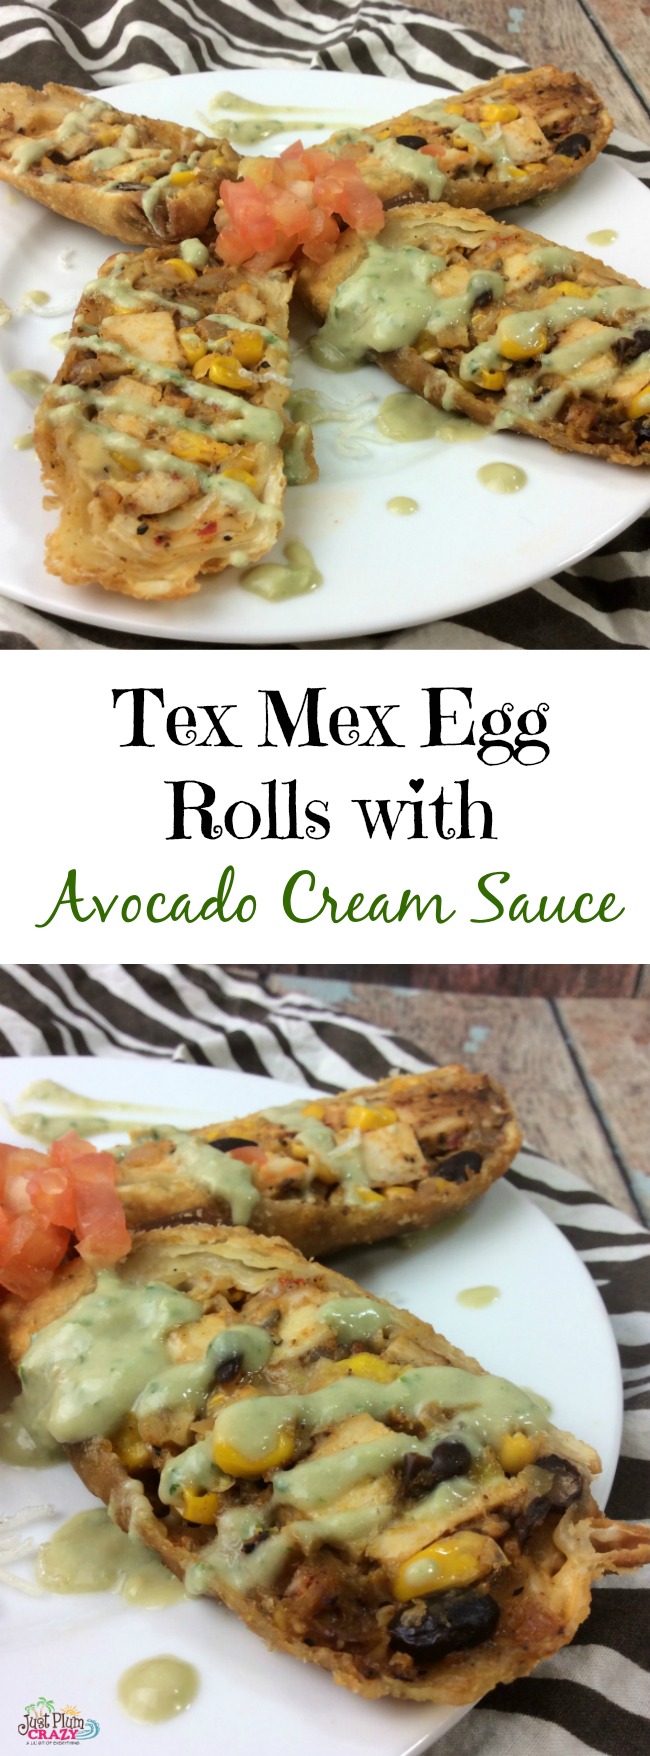 The Tex Mex Egg Rolls recipe is perfect for game day. You can buy the small taco shells and make a dozen that are the perfect finger food.